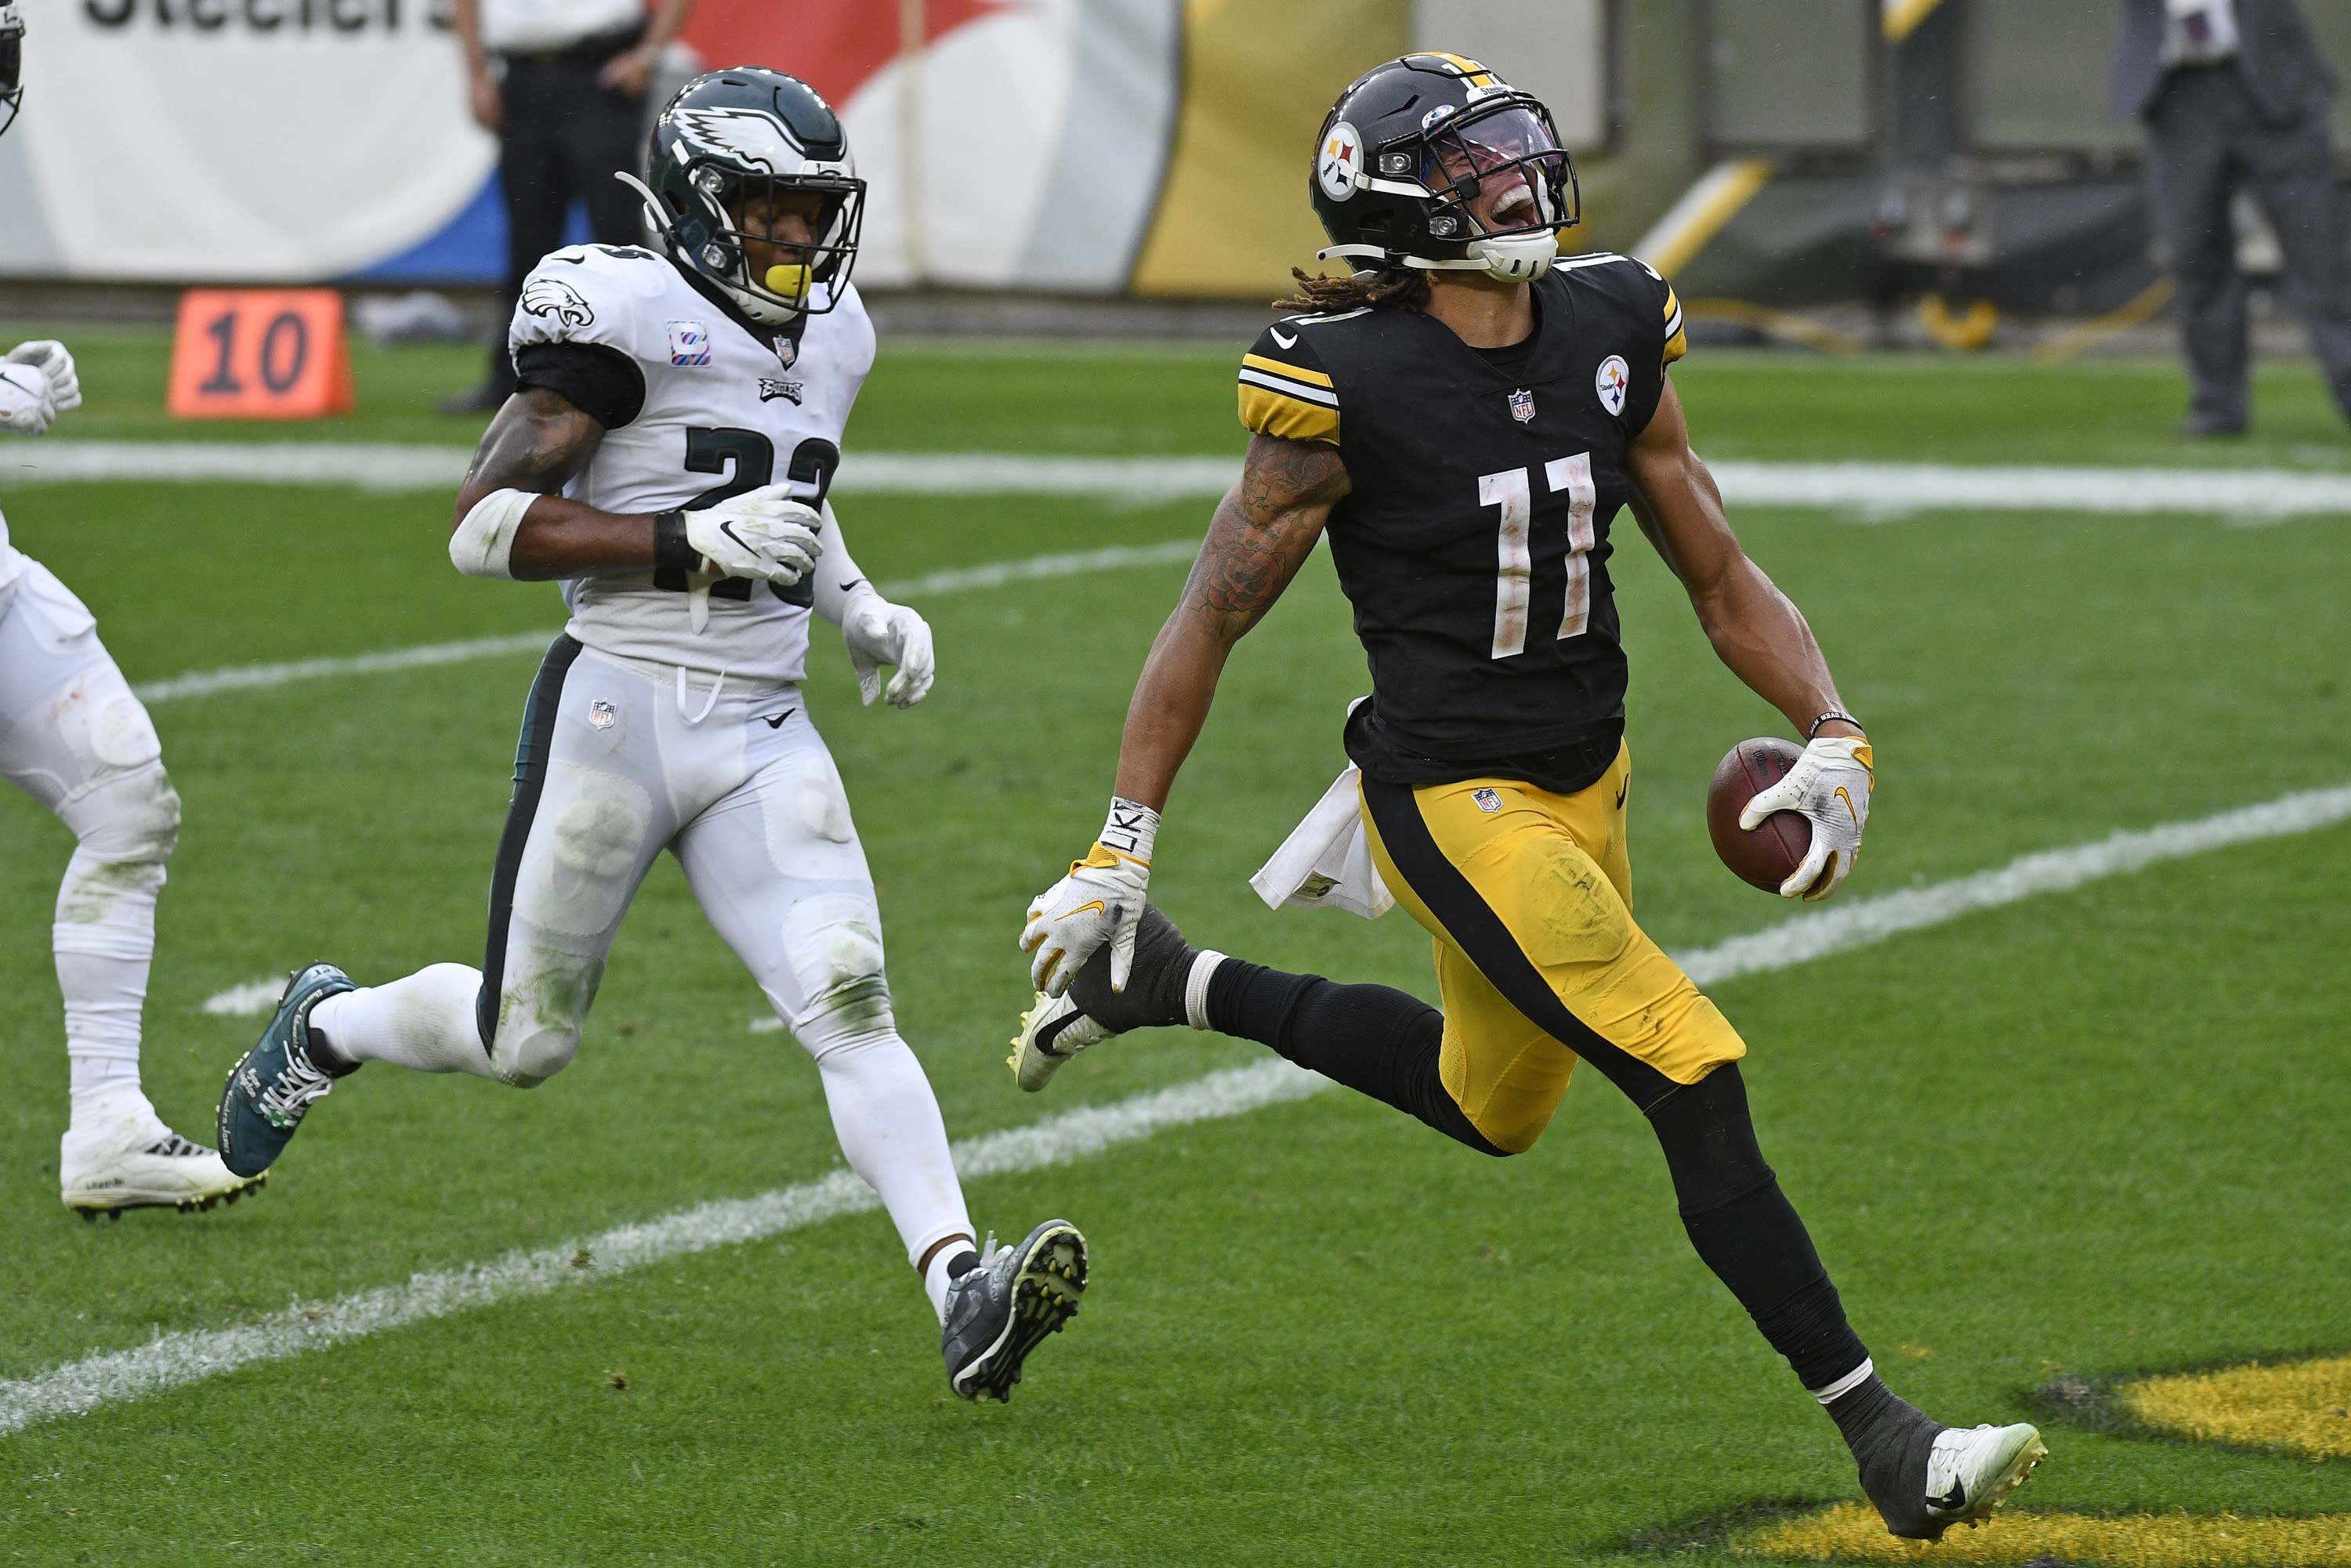 Dismal defense costs depleted Eagles in loss to Steelers